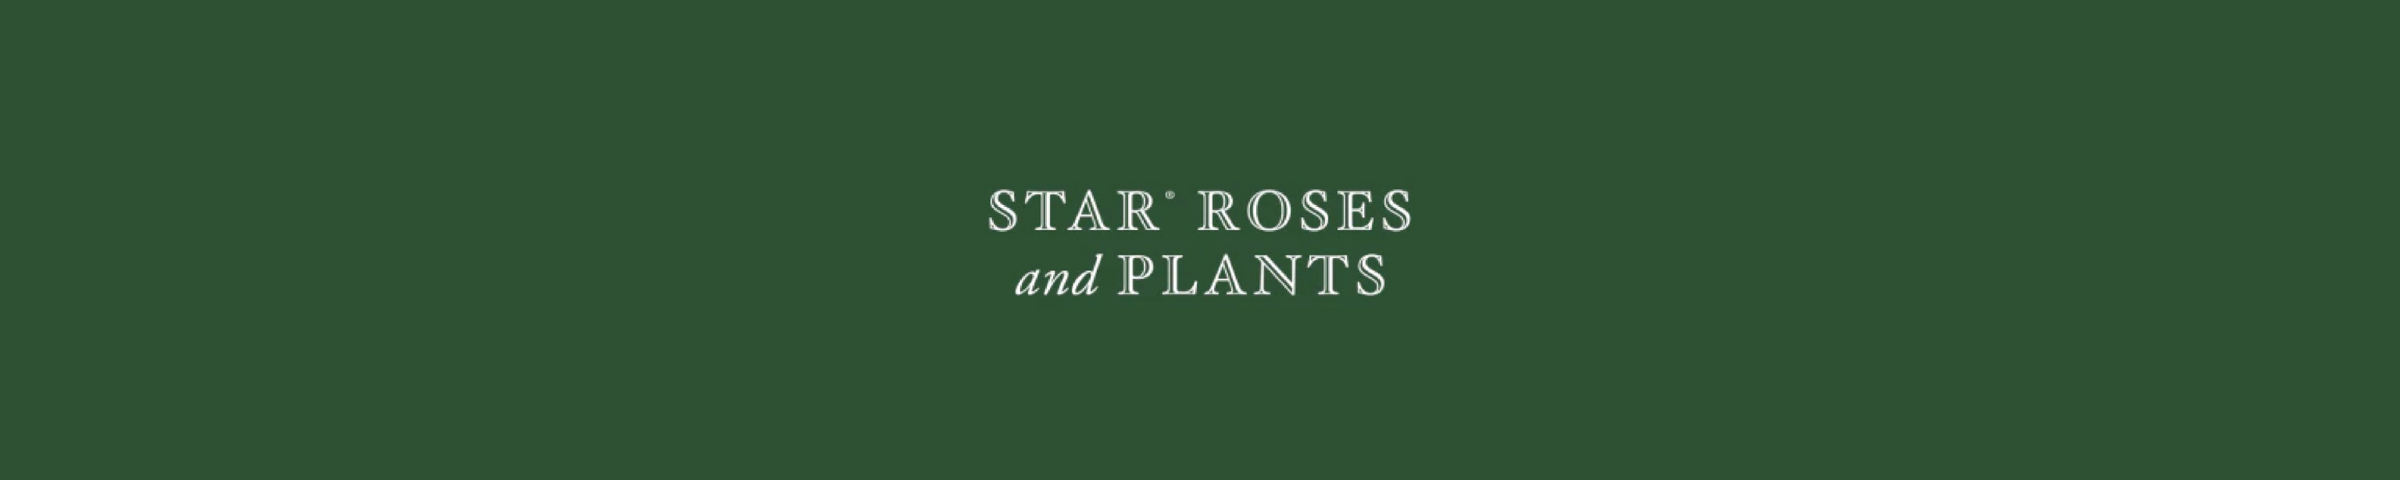 Star® Roses And Plants